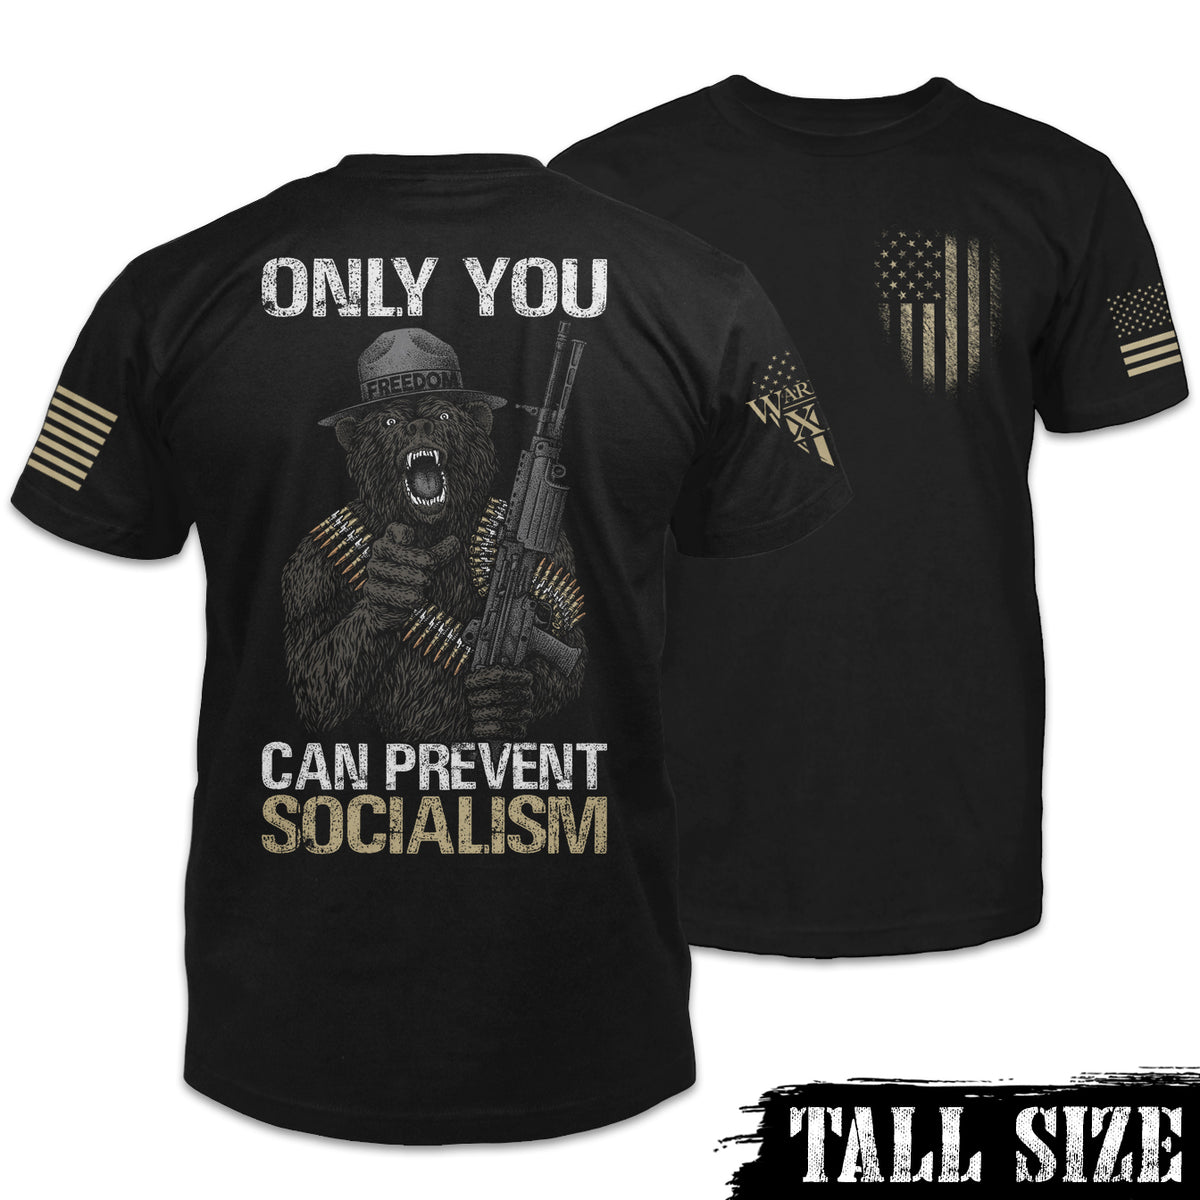 Front & back black tall size shirt with the words "Only you can prevent socialism" with a gorilla holding a gun printed on the shirt.